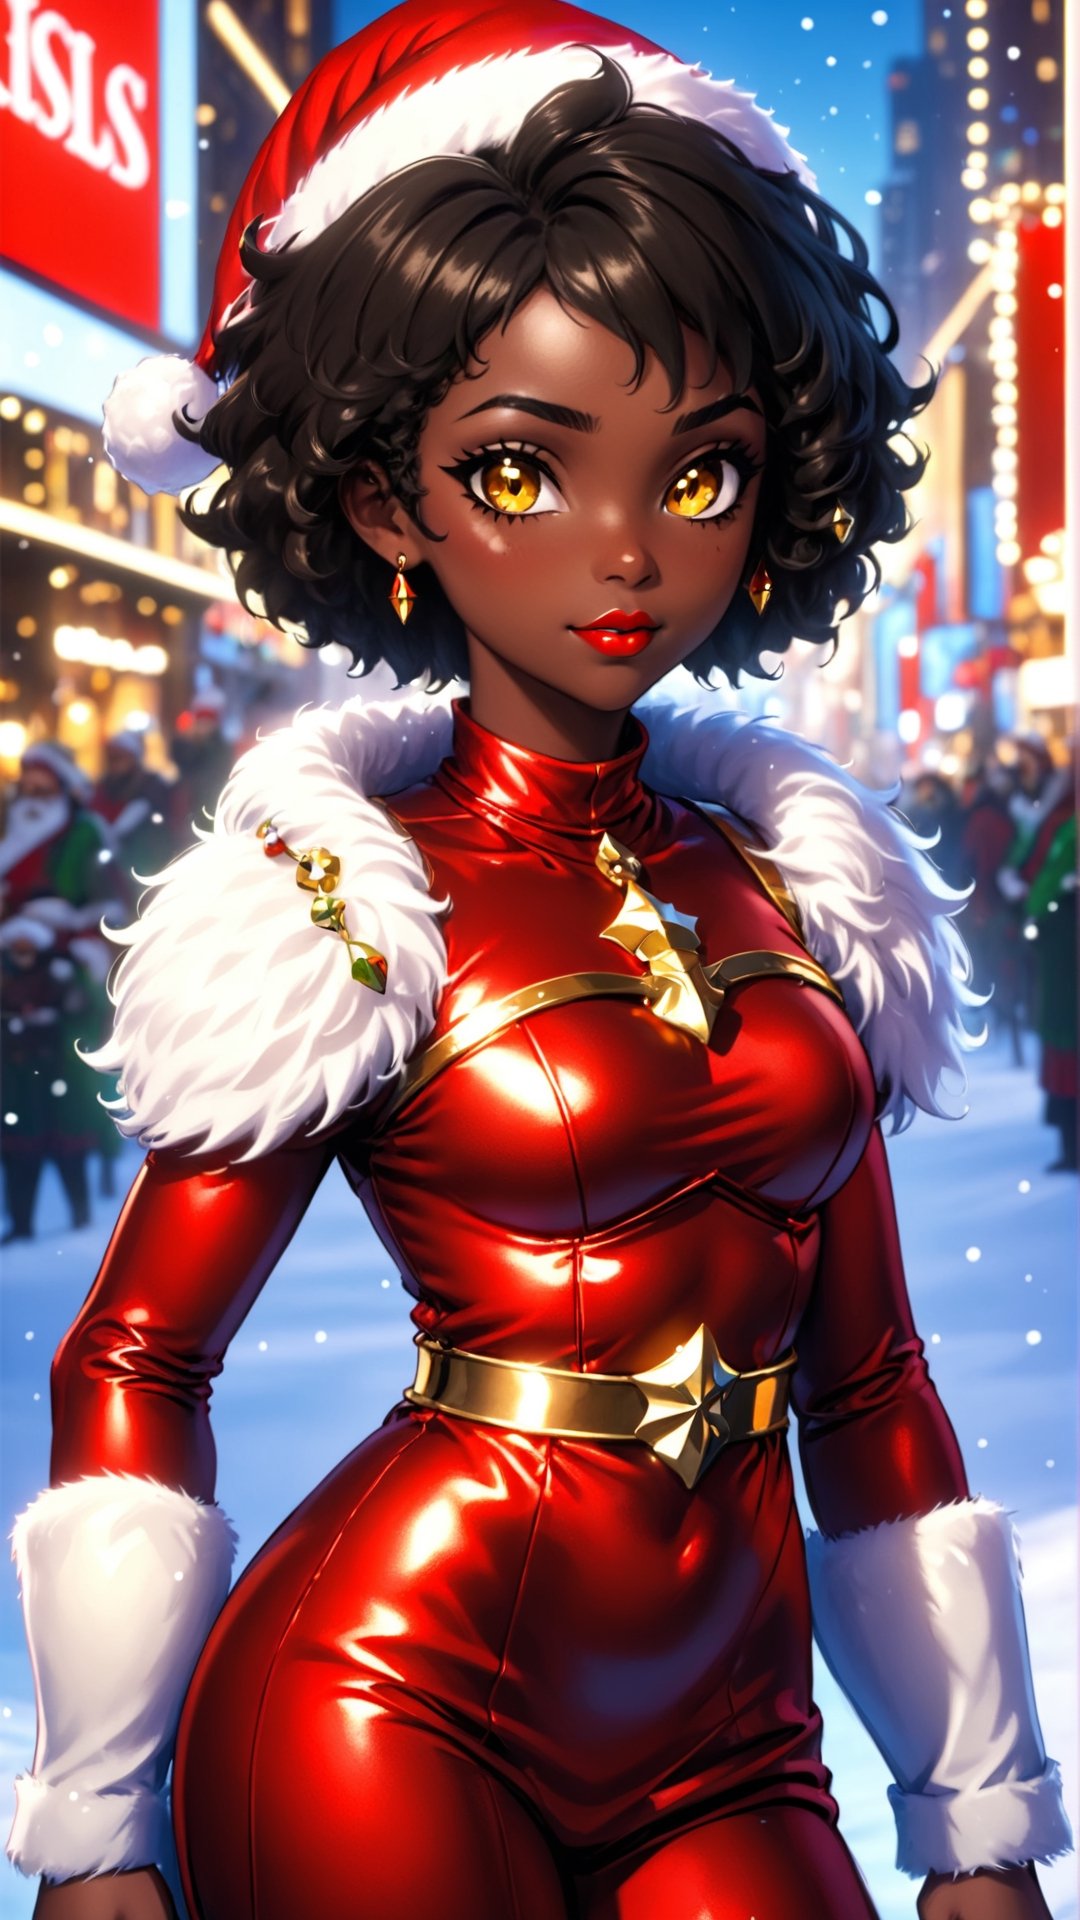 anitoon style, solo, dark skin, 1girl, yellow eyes, jewelry, black hair, short hair, dark-skinned female, makeup, lipstick, looking at viewer, curly hair, Fusion of medieval armor and santa costume, ring earing, gold neckless, gold buncles, fluffy fur dress, red dress, sleeveless, highneck, Times Square Garden, Night, Christmas, ,ral-chrcrts,christmas